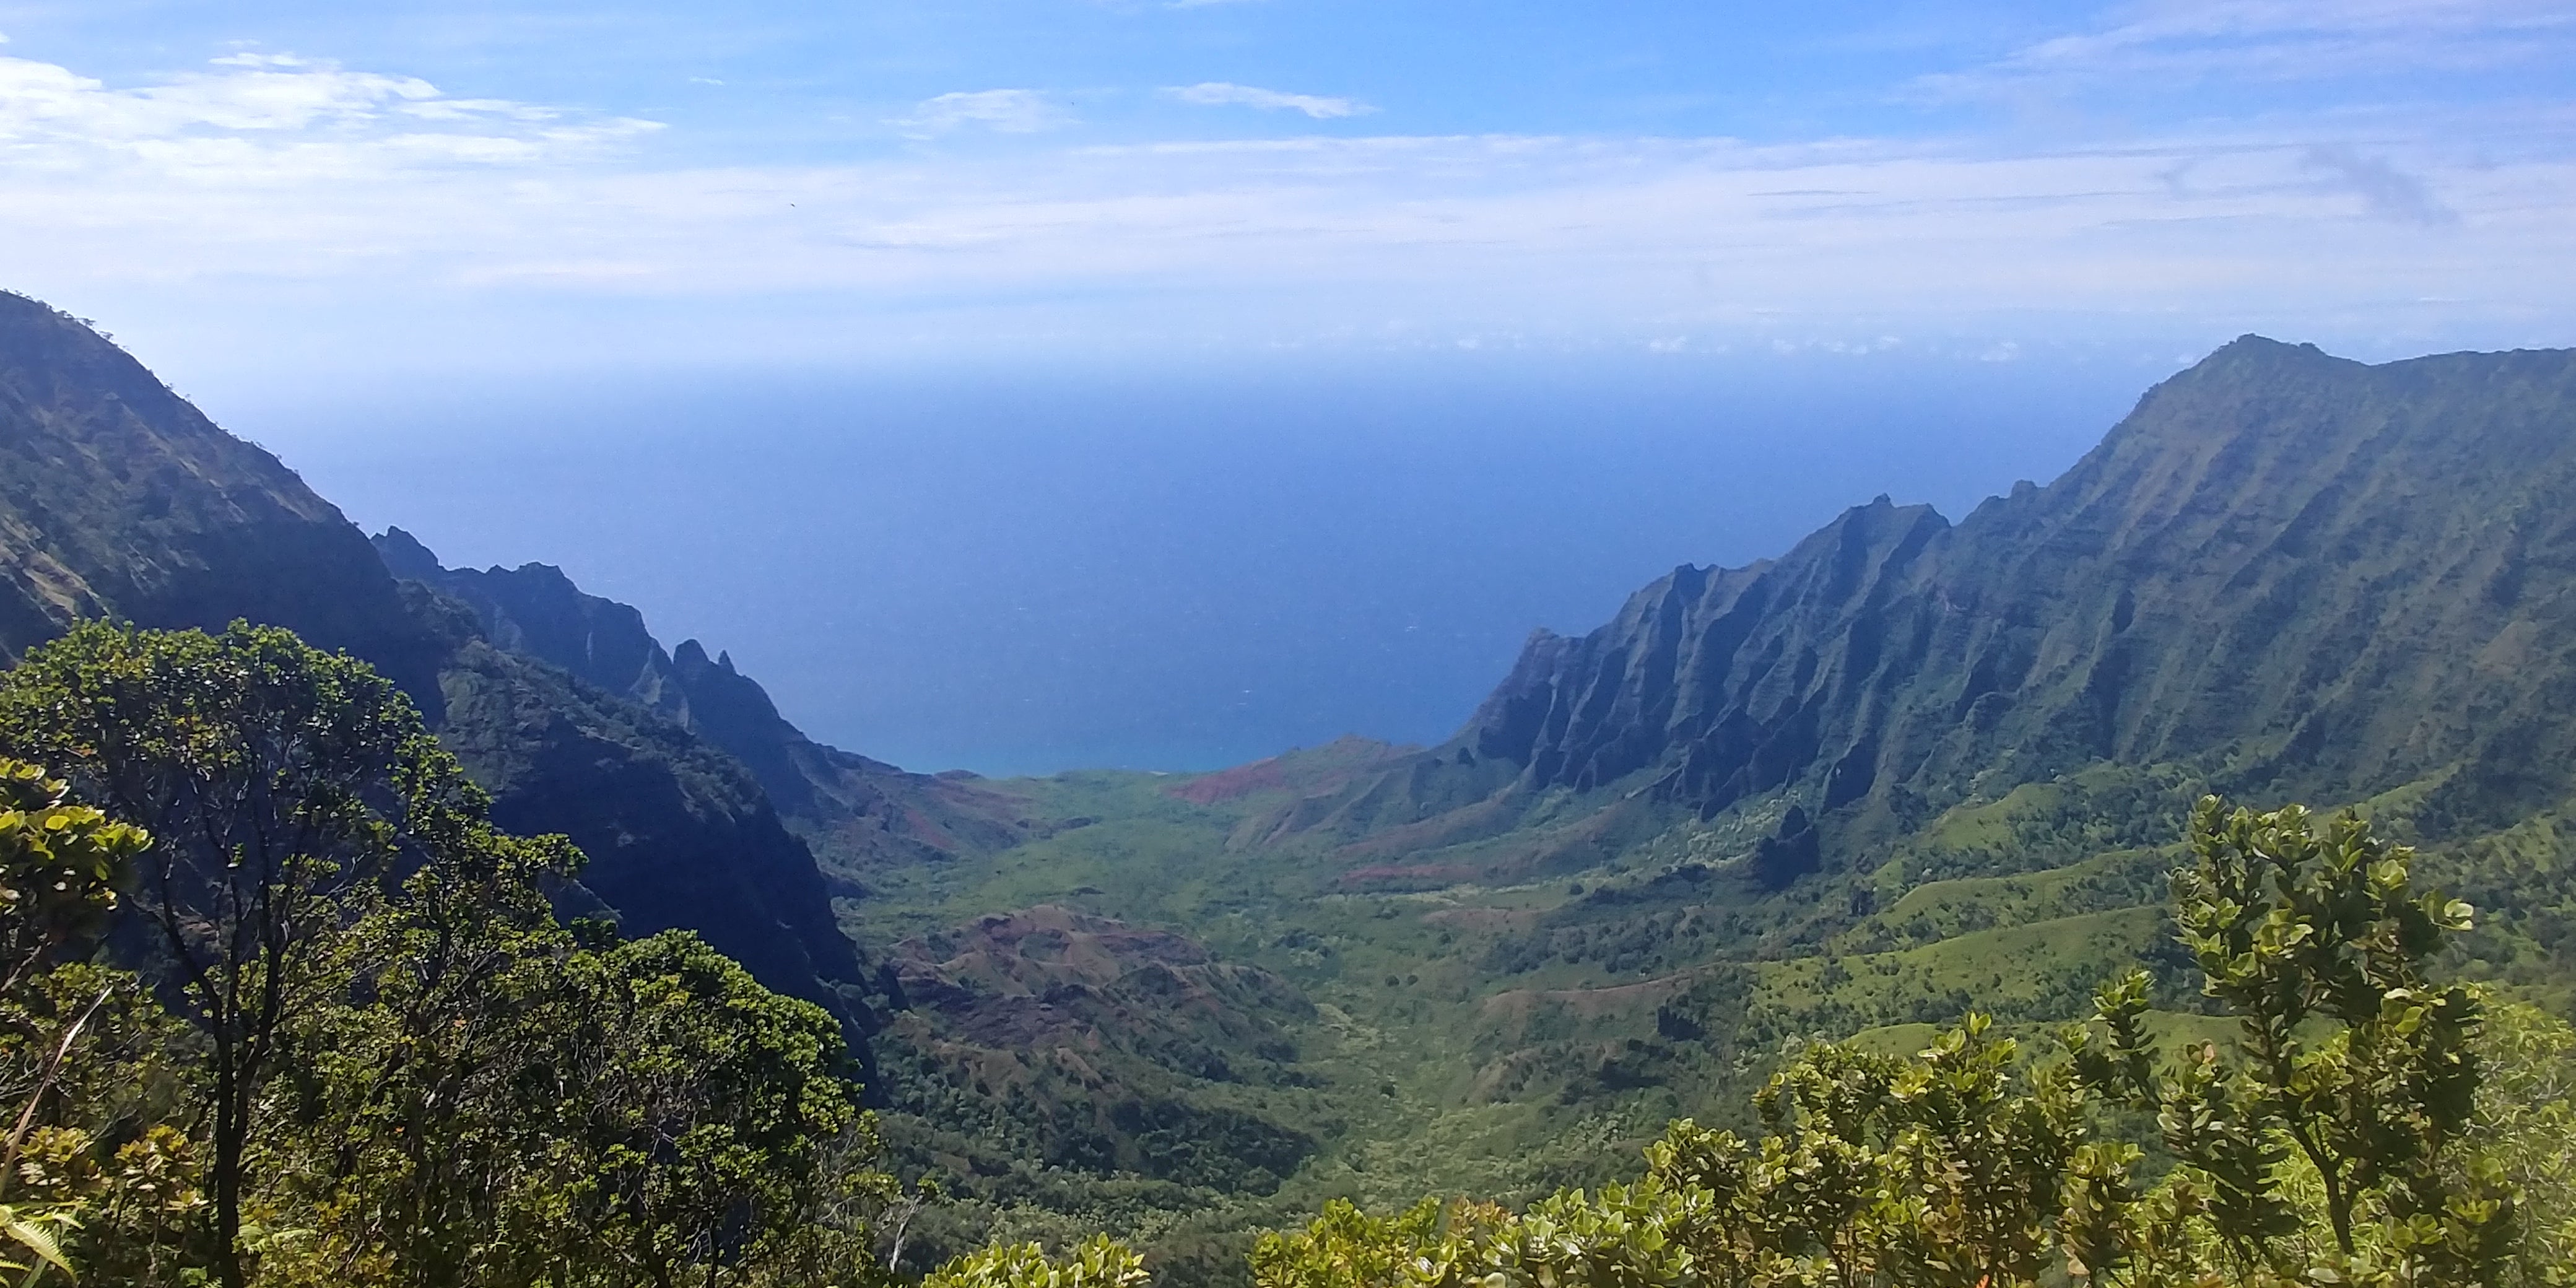 Nearby, the lookout over Kalalau Valley is incredible